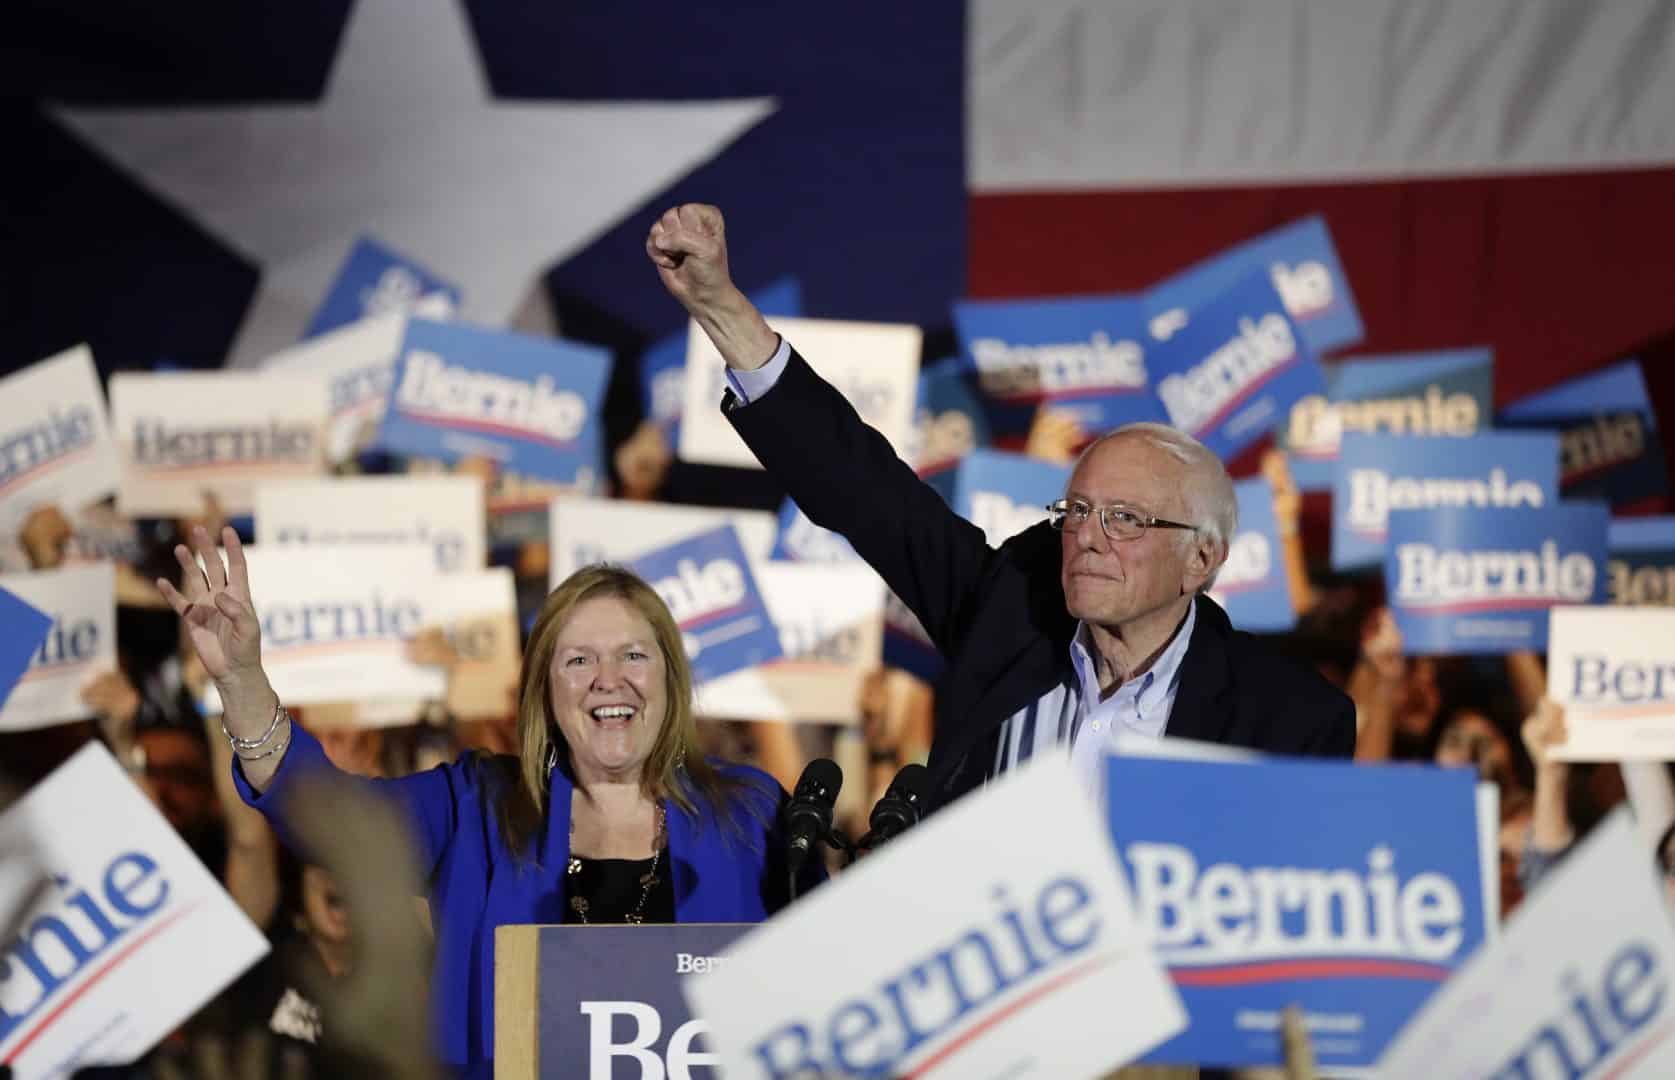 Sanders wins Nevada and pulls further away from rivals